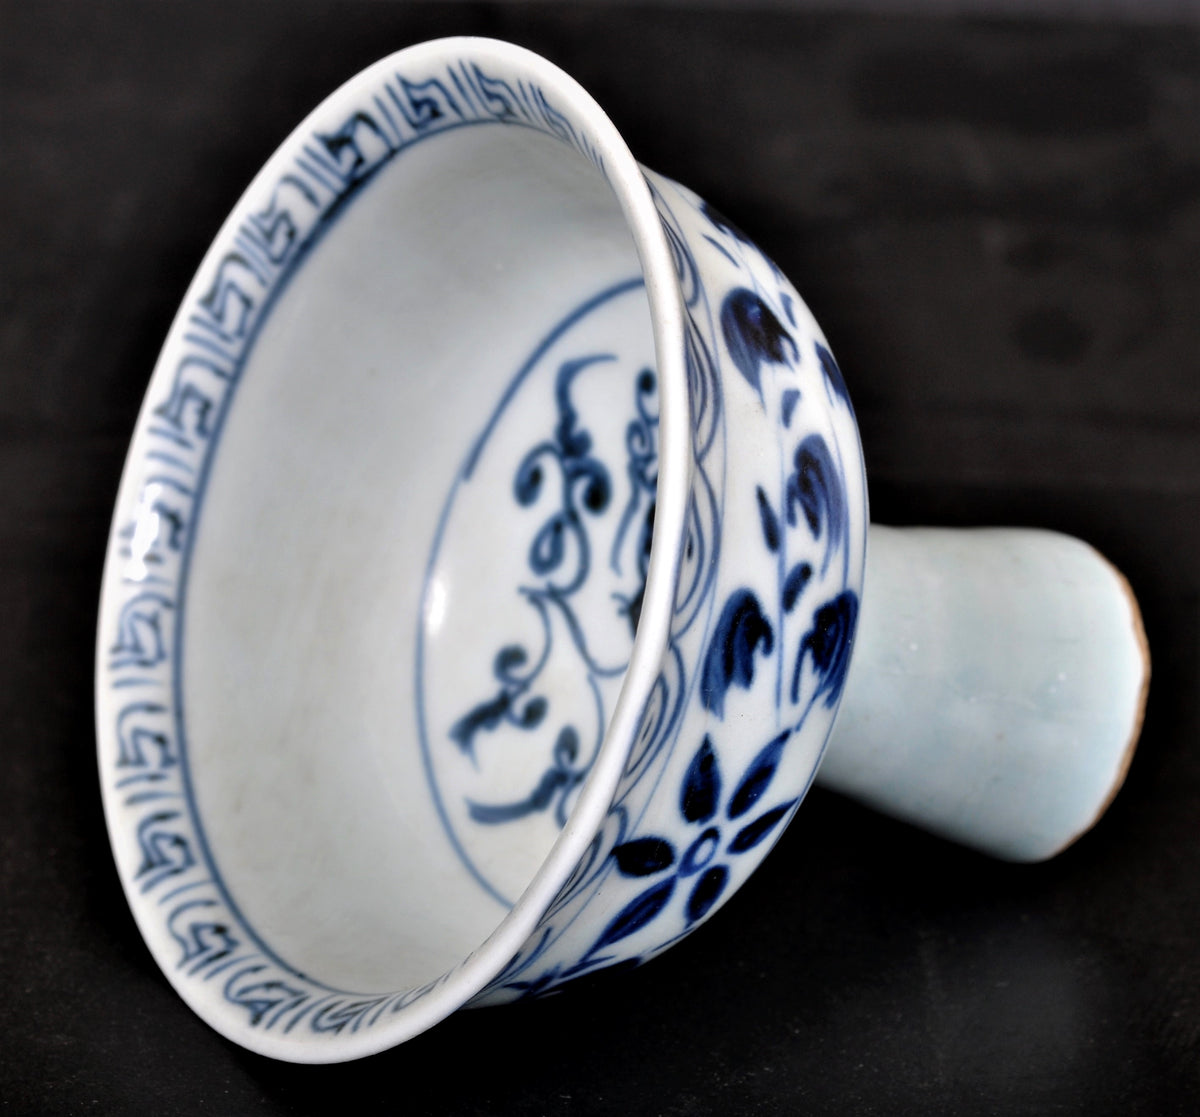 Ming/Yuan Dynasty Chinese Blue & White Porcelain Stem Cup